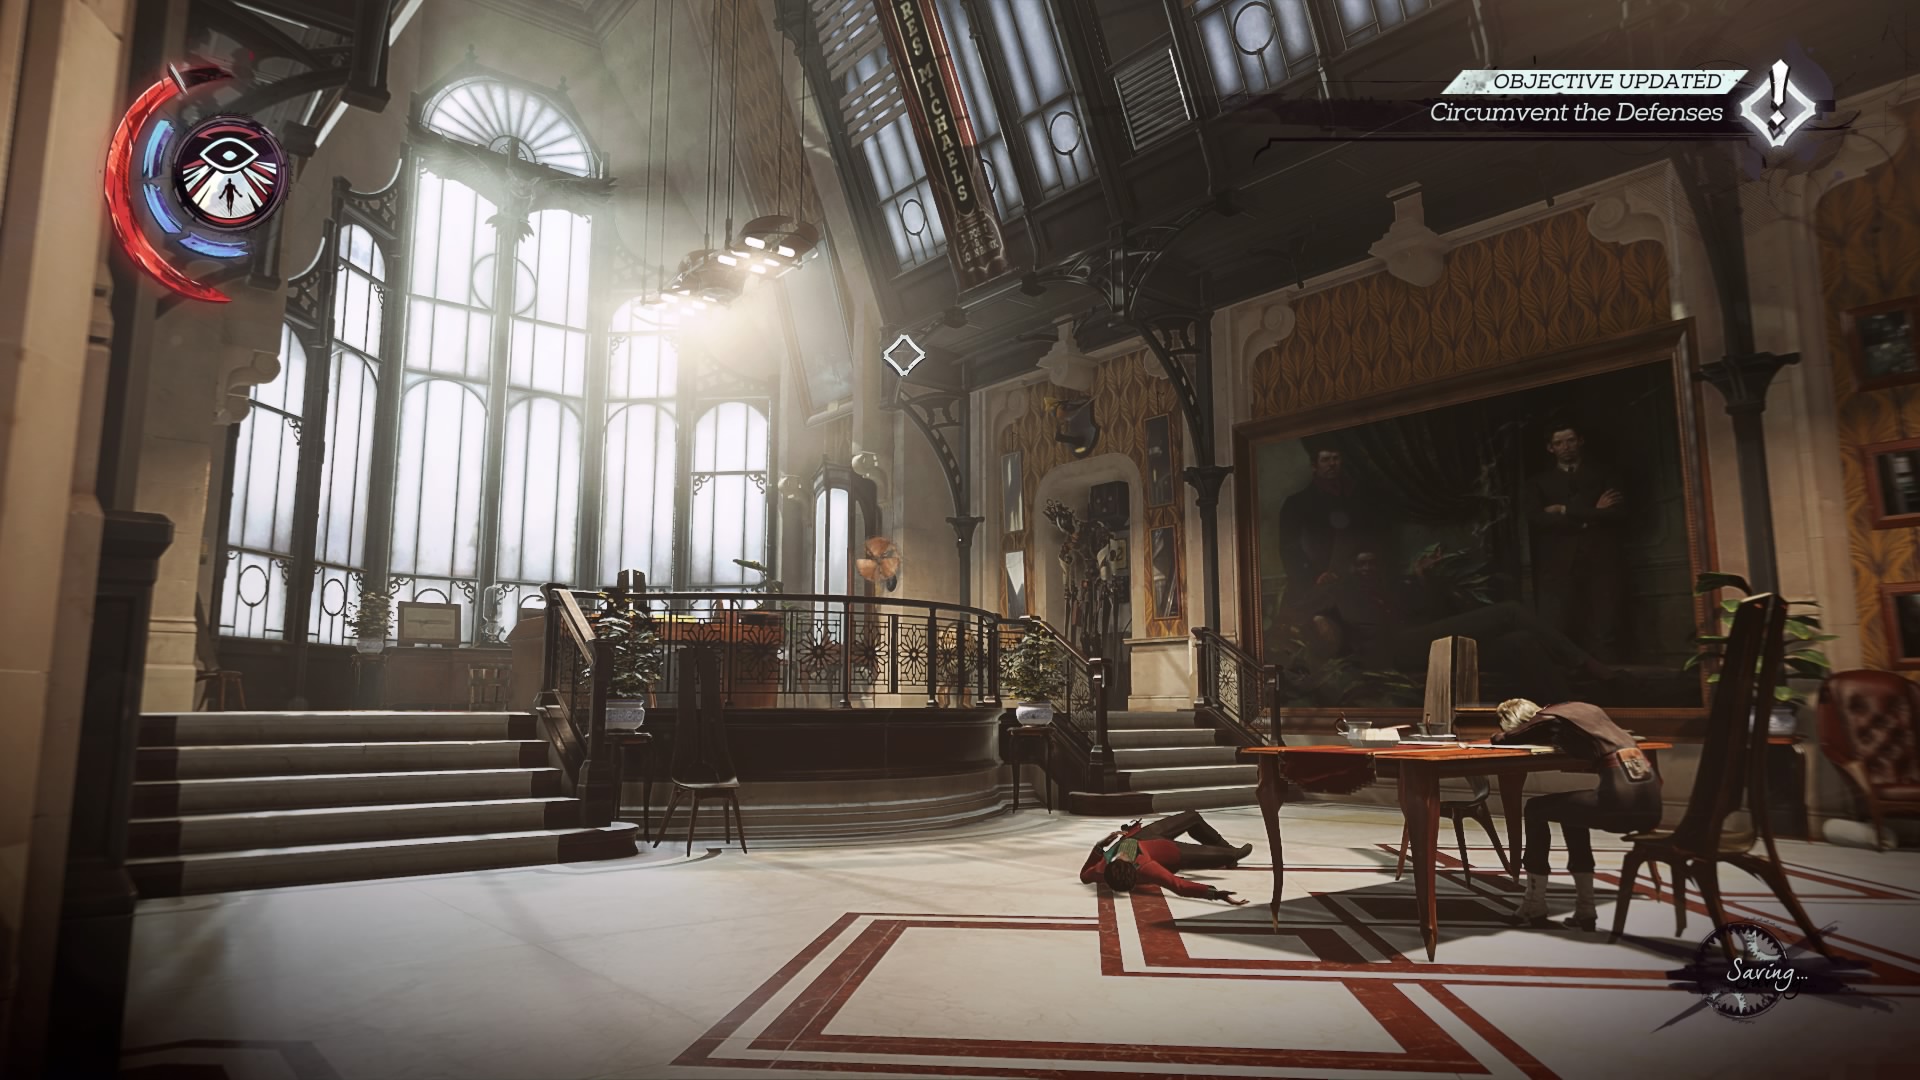 Dishonored 2 Guide/Walkthrough - Part III - The Wall of Light and